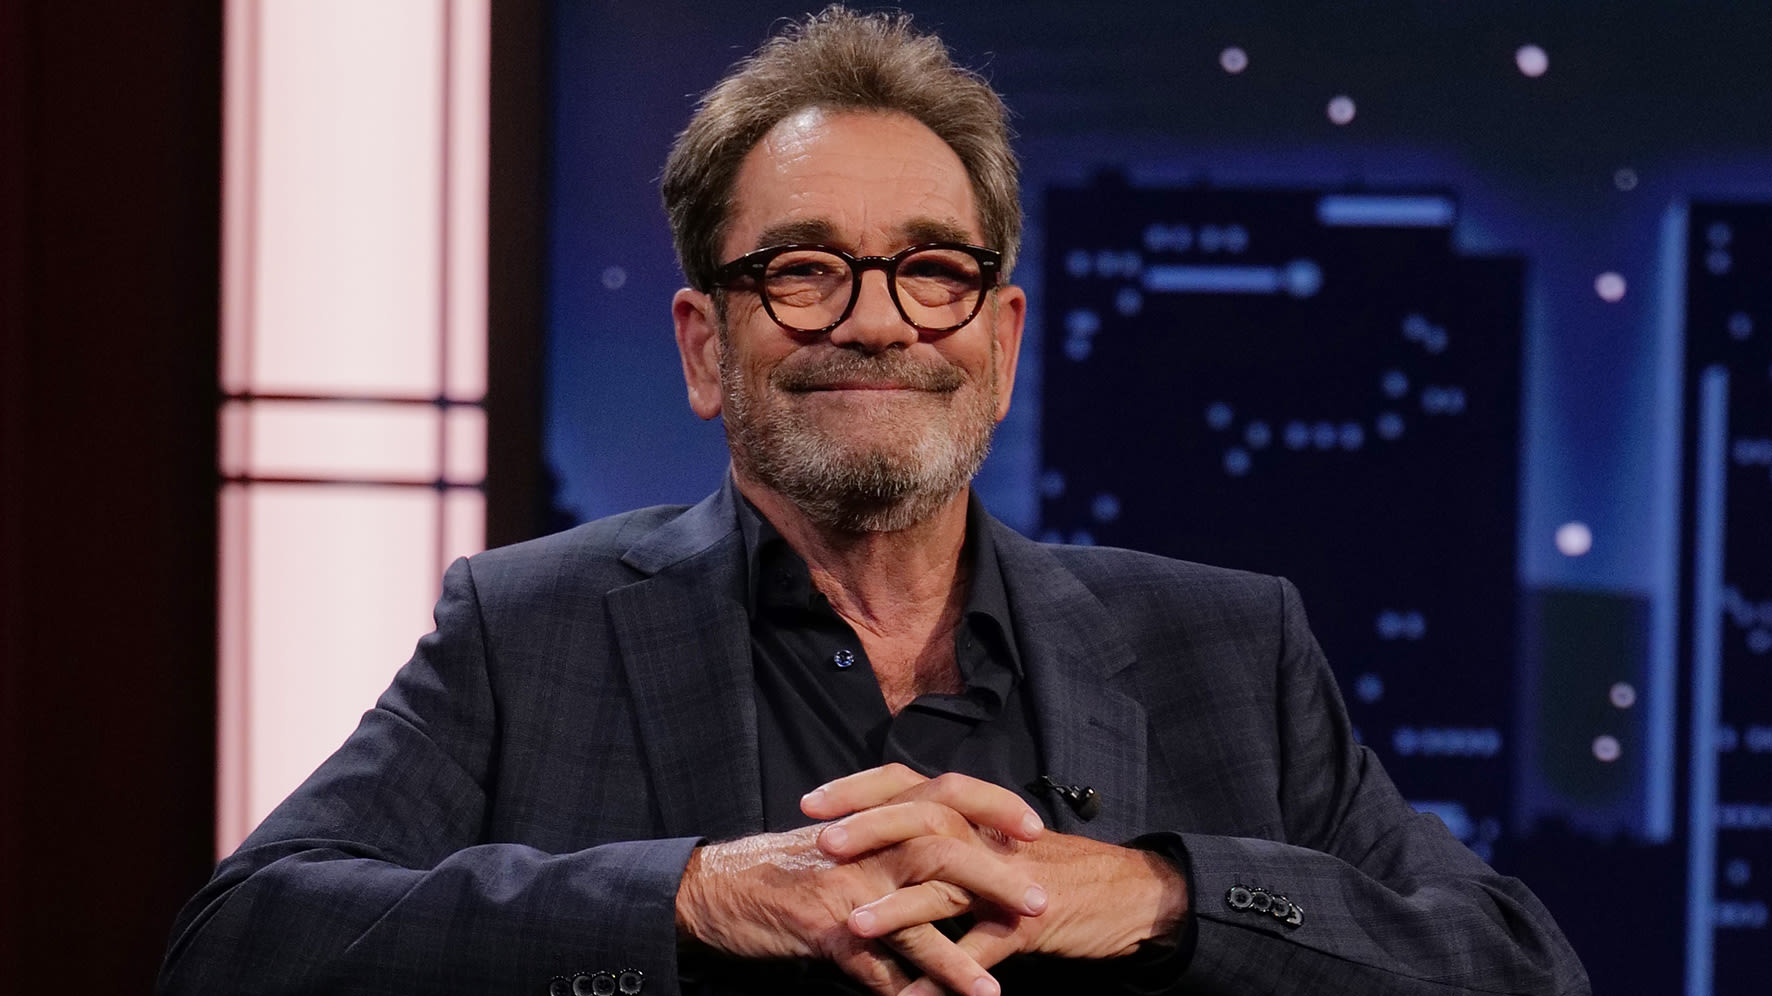 "You lose your hearing - what you gonna do?": Huey Lewis opens up about hearing loss